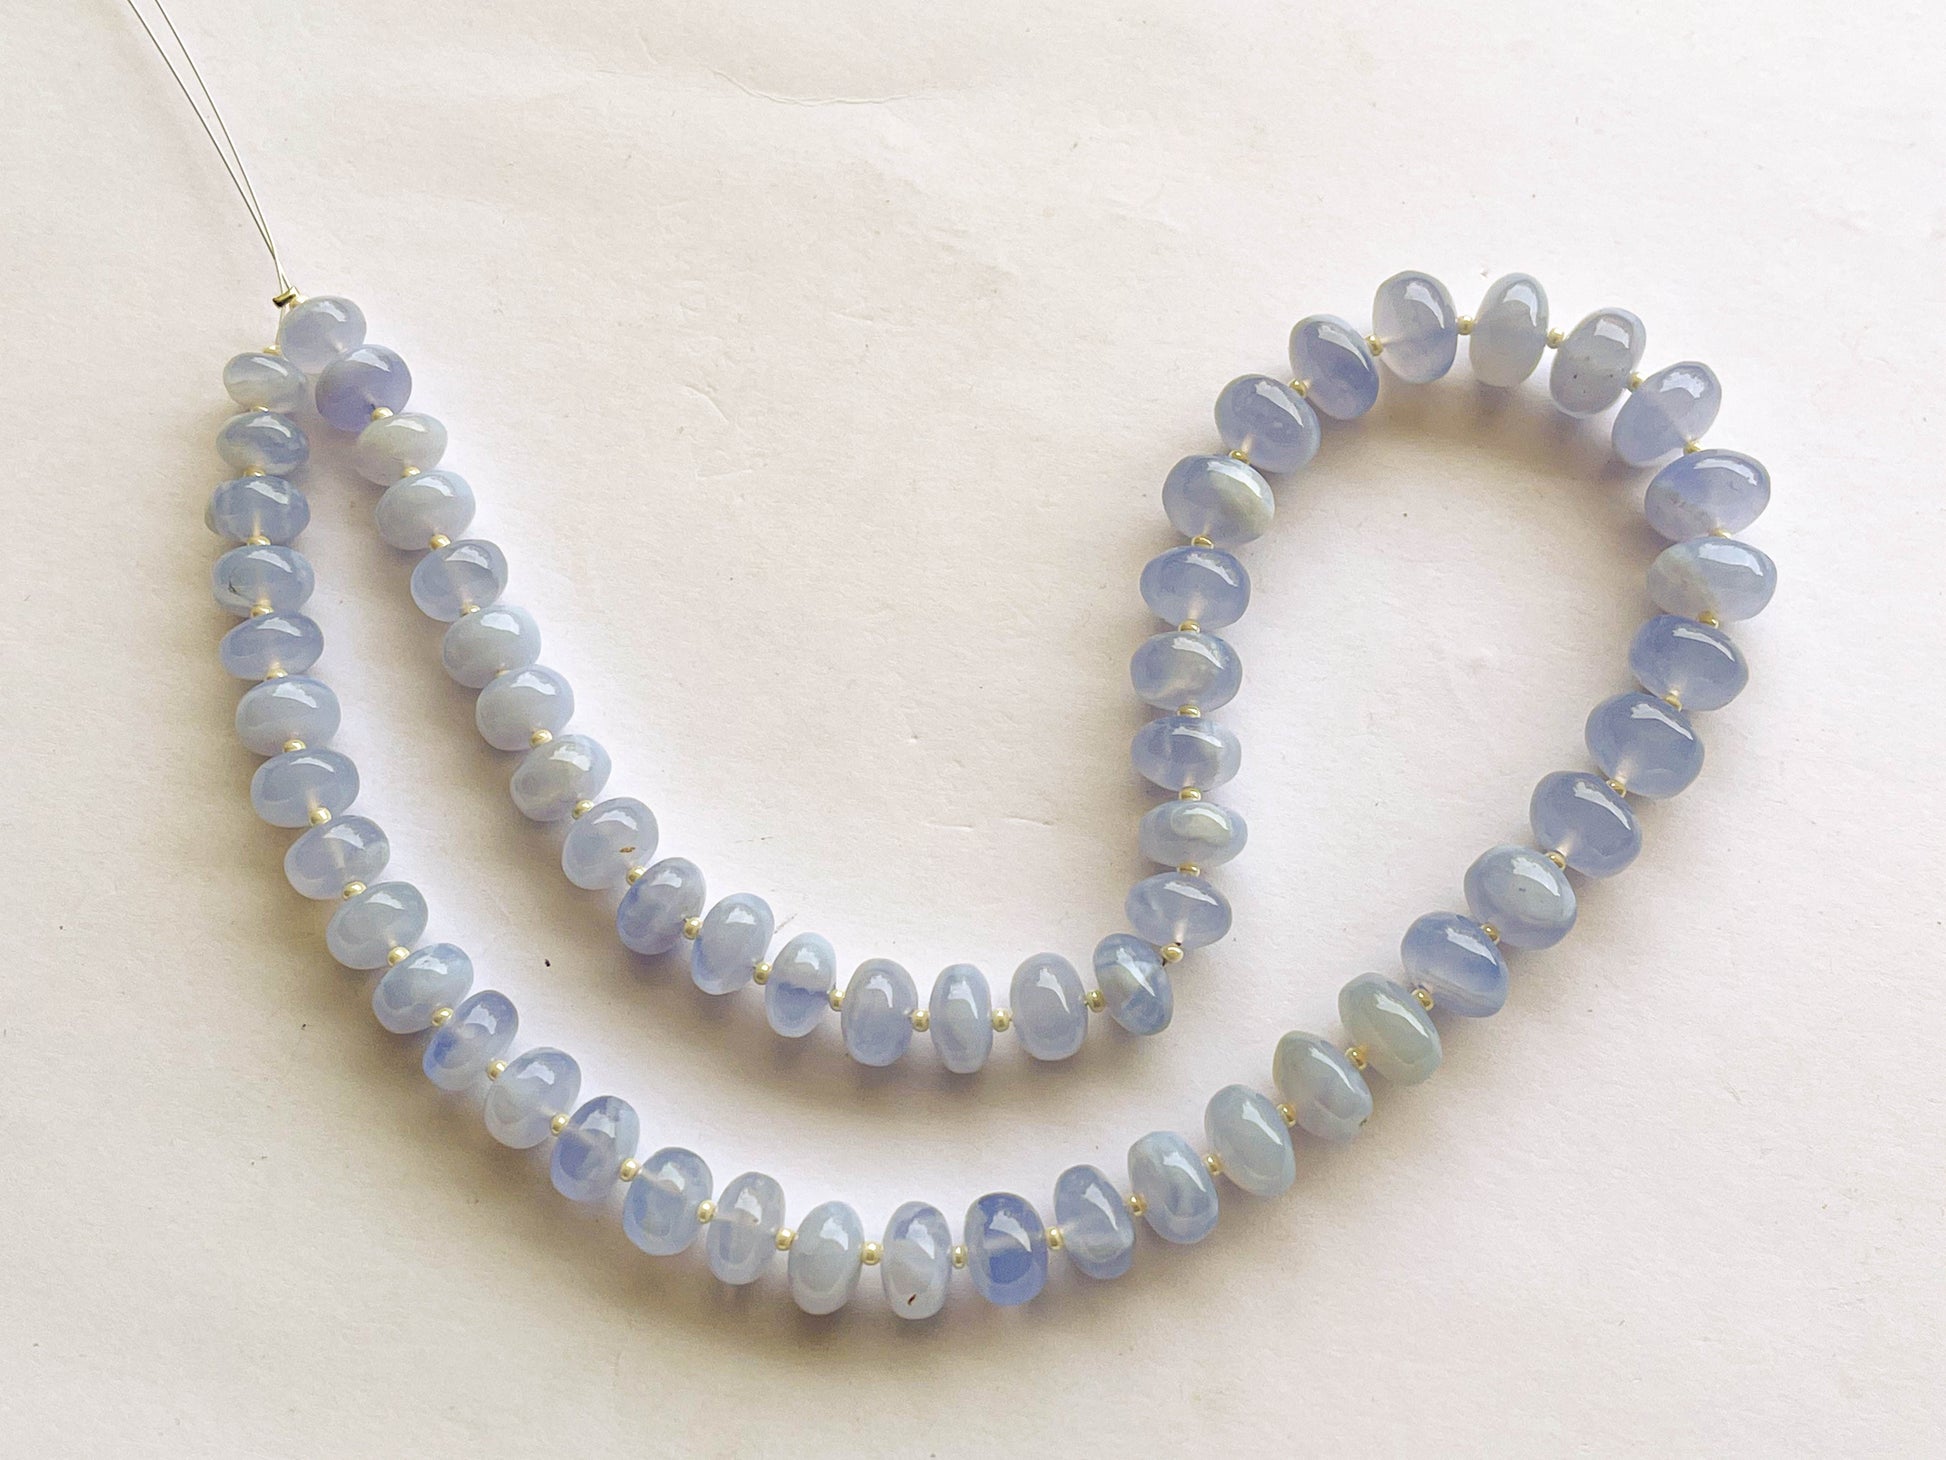 Blue Chalcedony Smooth Rondelle Shape Beads Beadsforyourjewelry